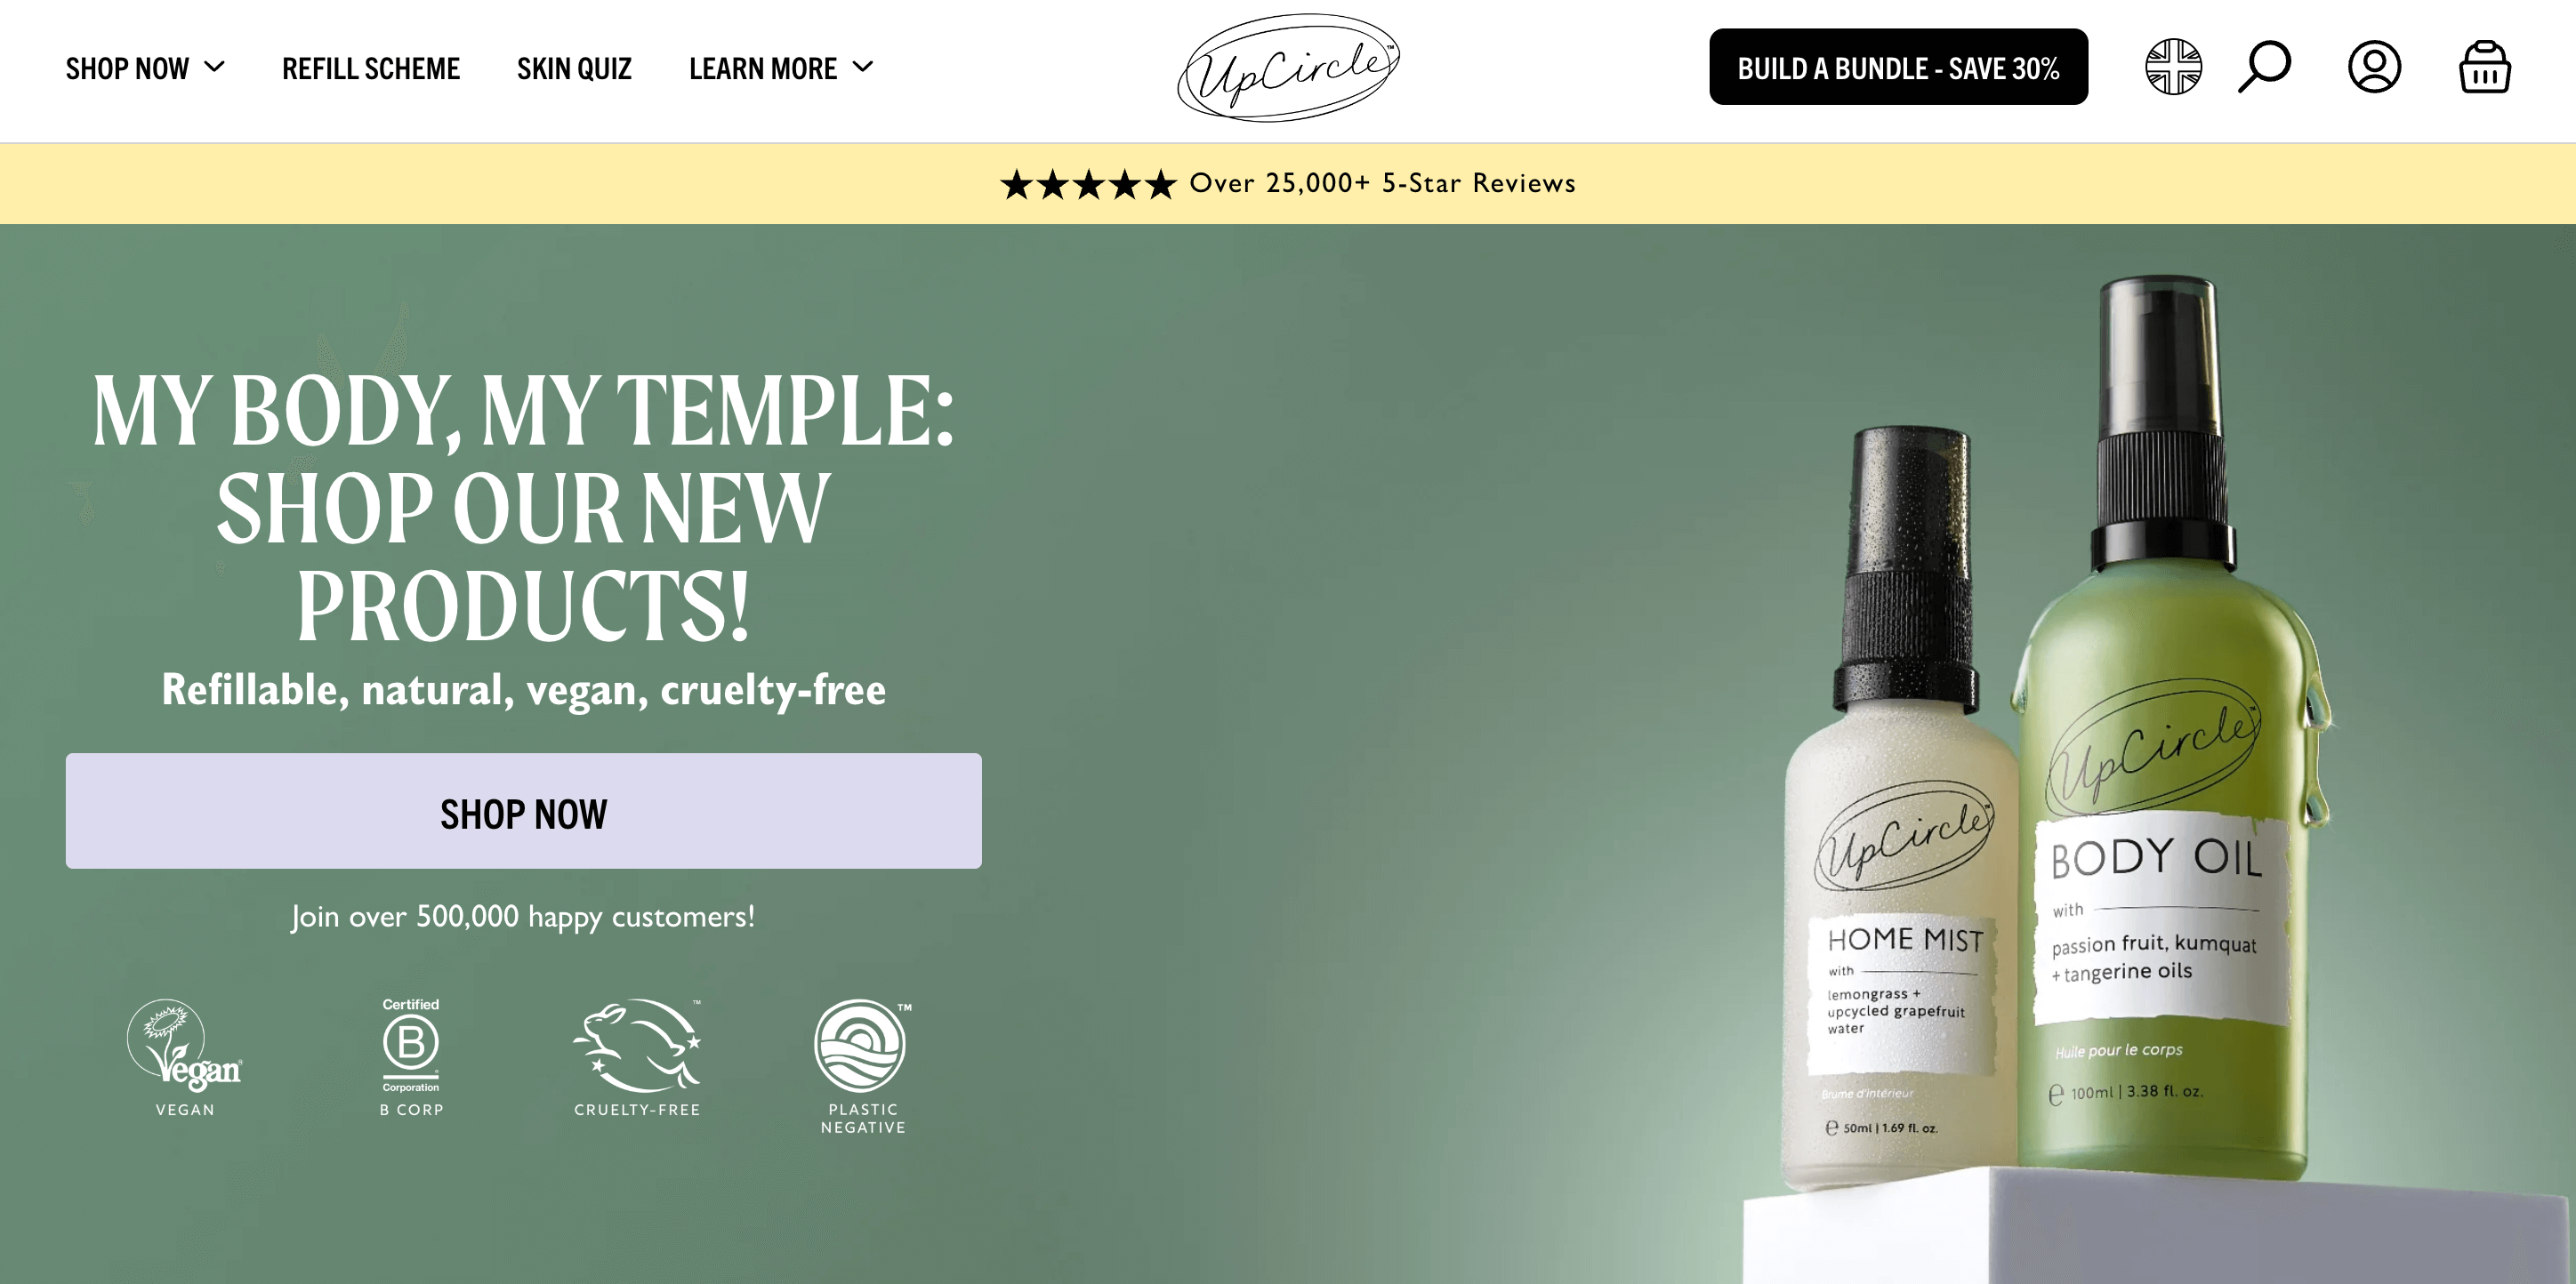 A screenshot from UpCircle’s website showing its new body care products. 